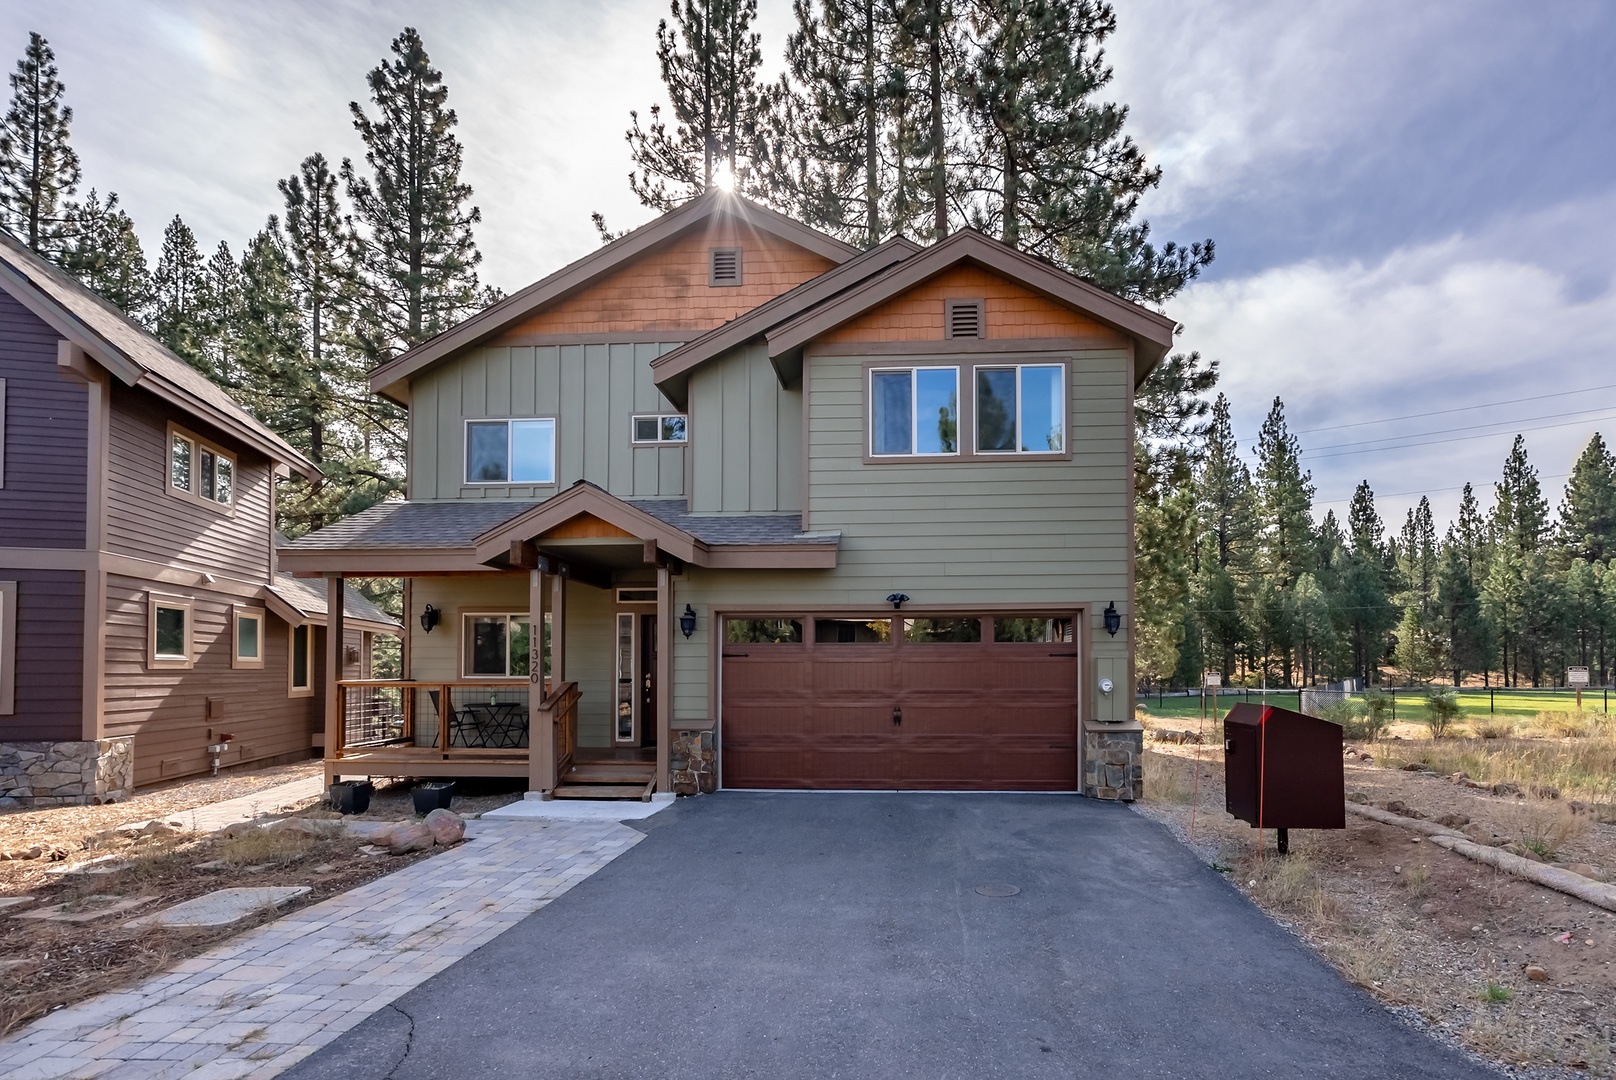 Front view of home: Wolverine Truckee Getaway